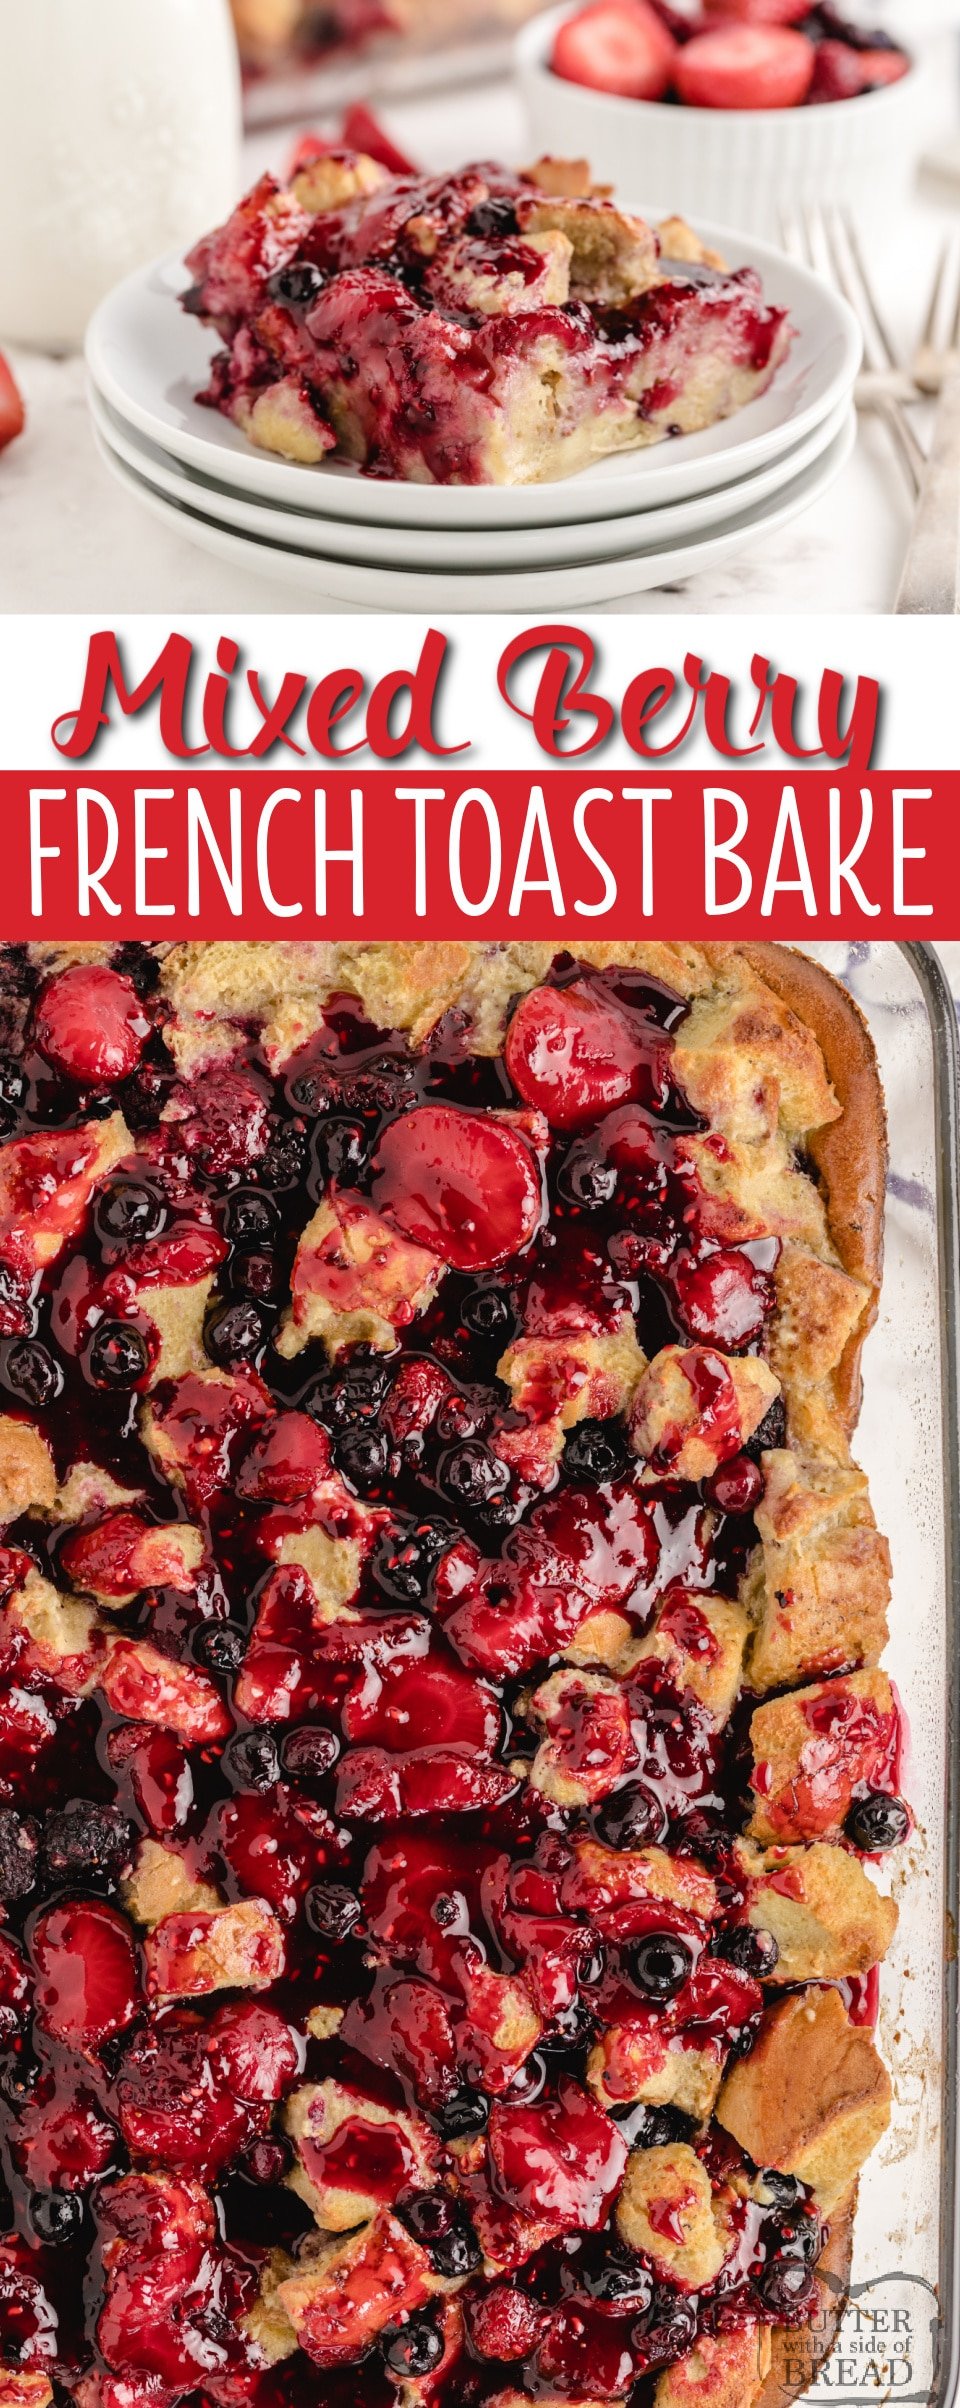 Berry French Toast Bake is made with french bread, eggs, cream, fresh strawberries and frozen mixed berries. This baked french toast recipe is simple, delicious and perfect for breakfast or dinner!